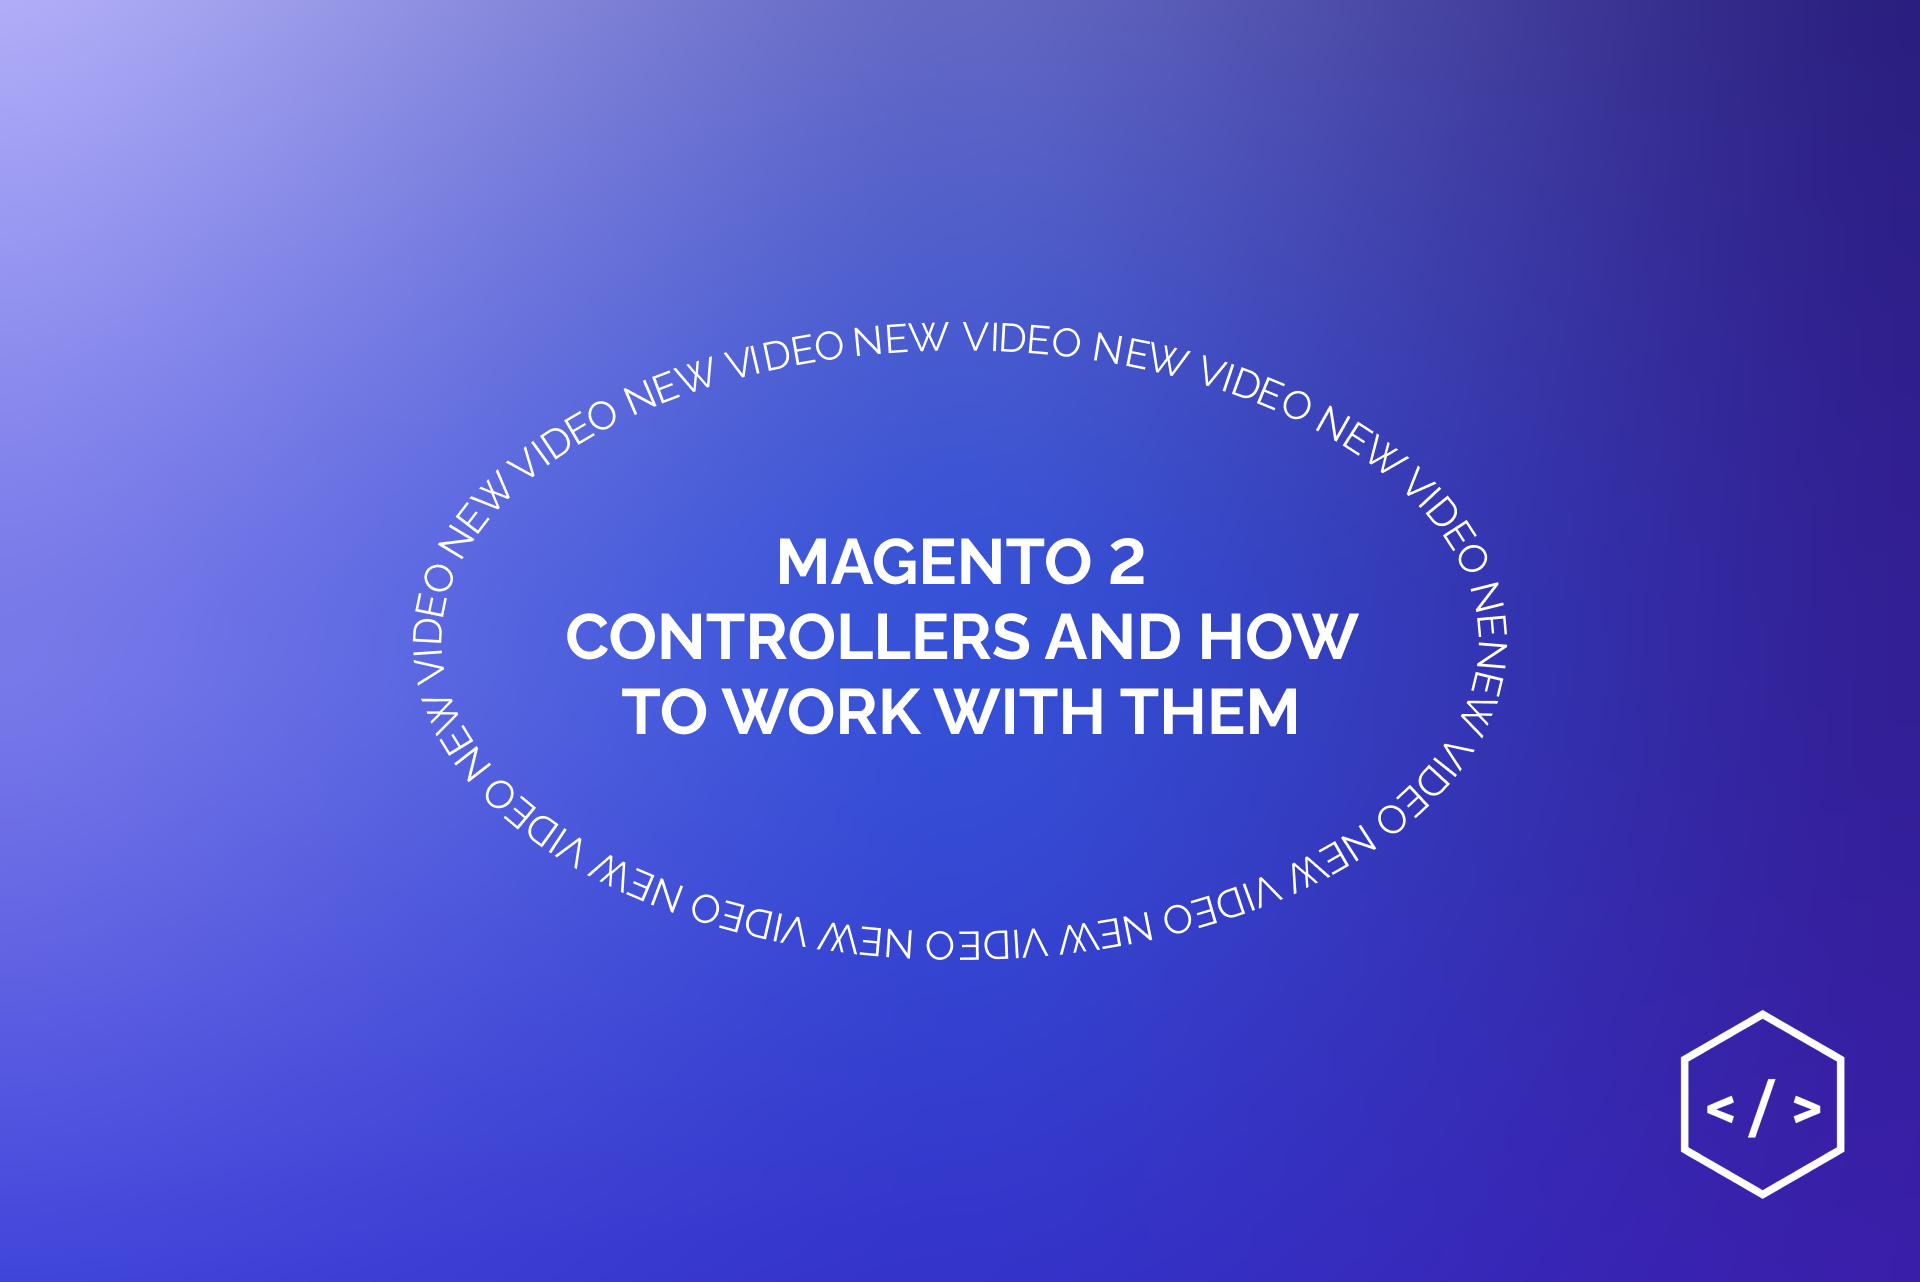 What are Magento 2 Controllers?